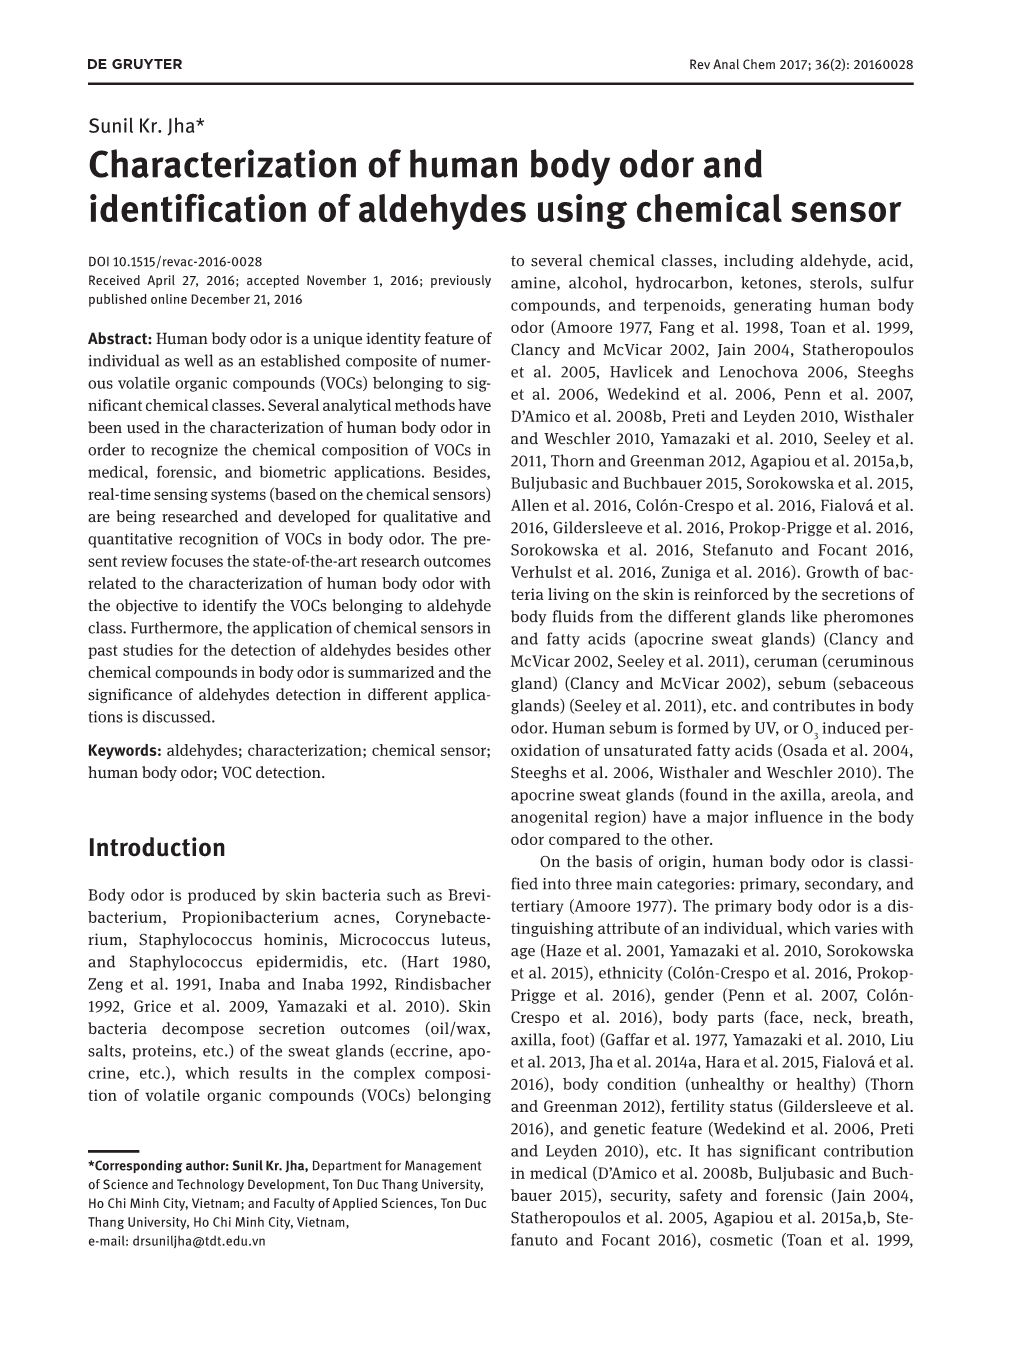 Characterization of Human Body Odor and Identification of Aldehydes Using Chemical Sensor